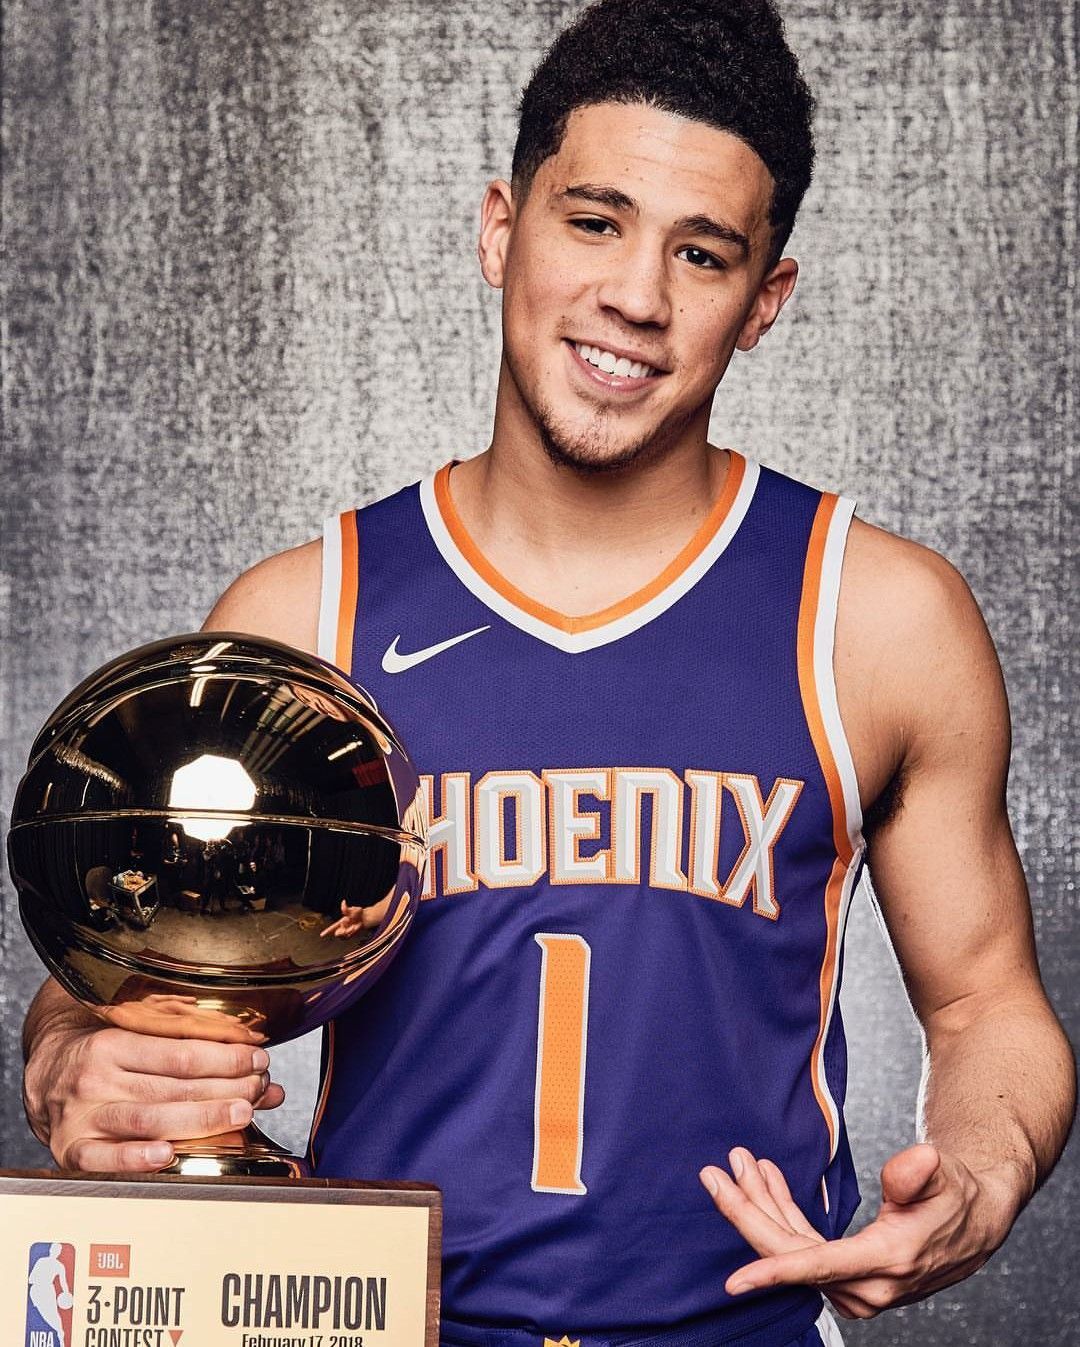 Devin Booker Wallpaper Image In Collection